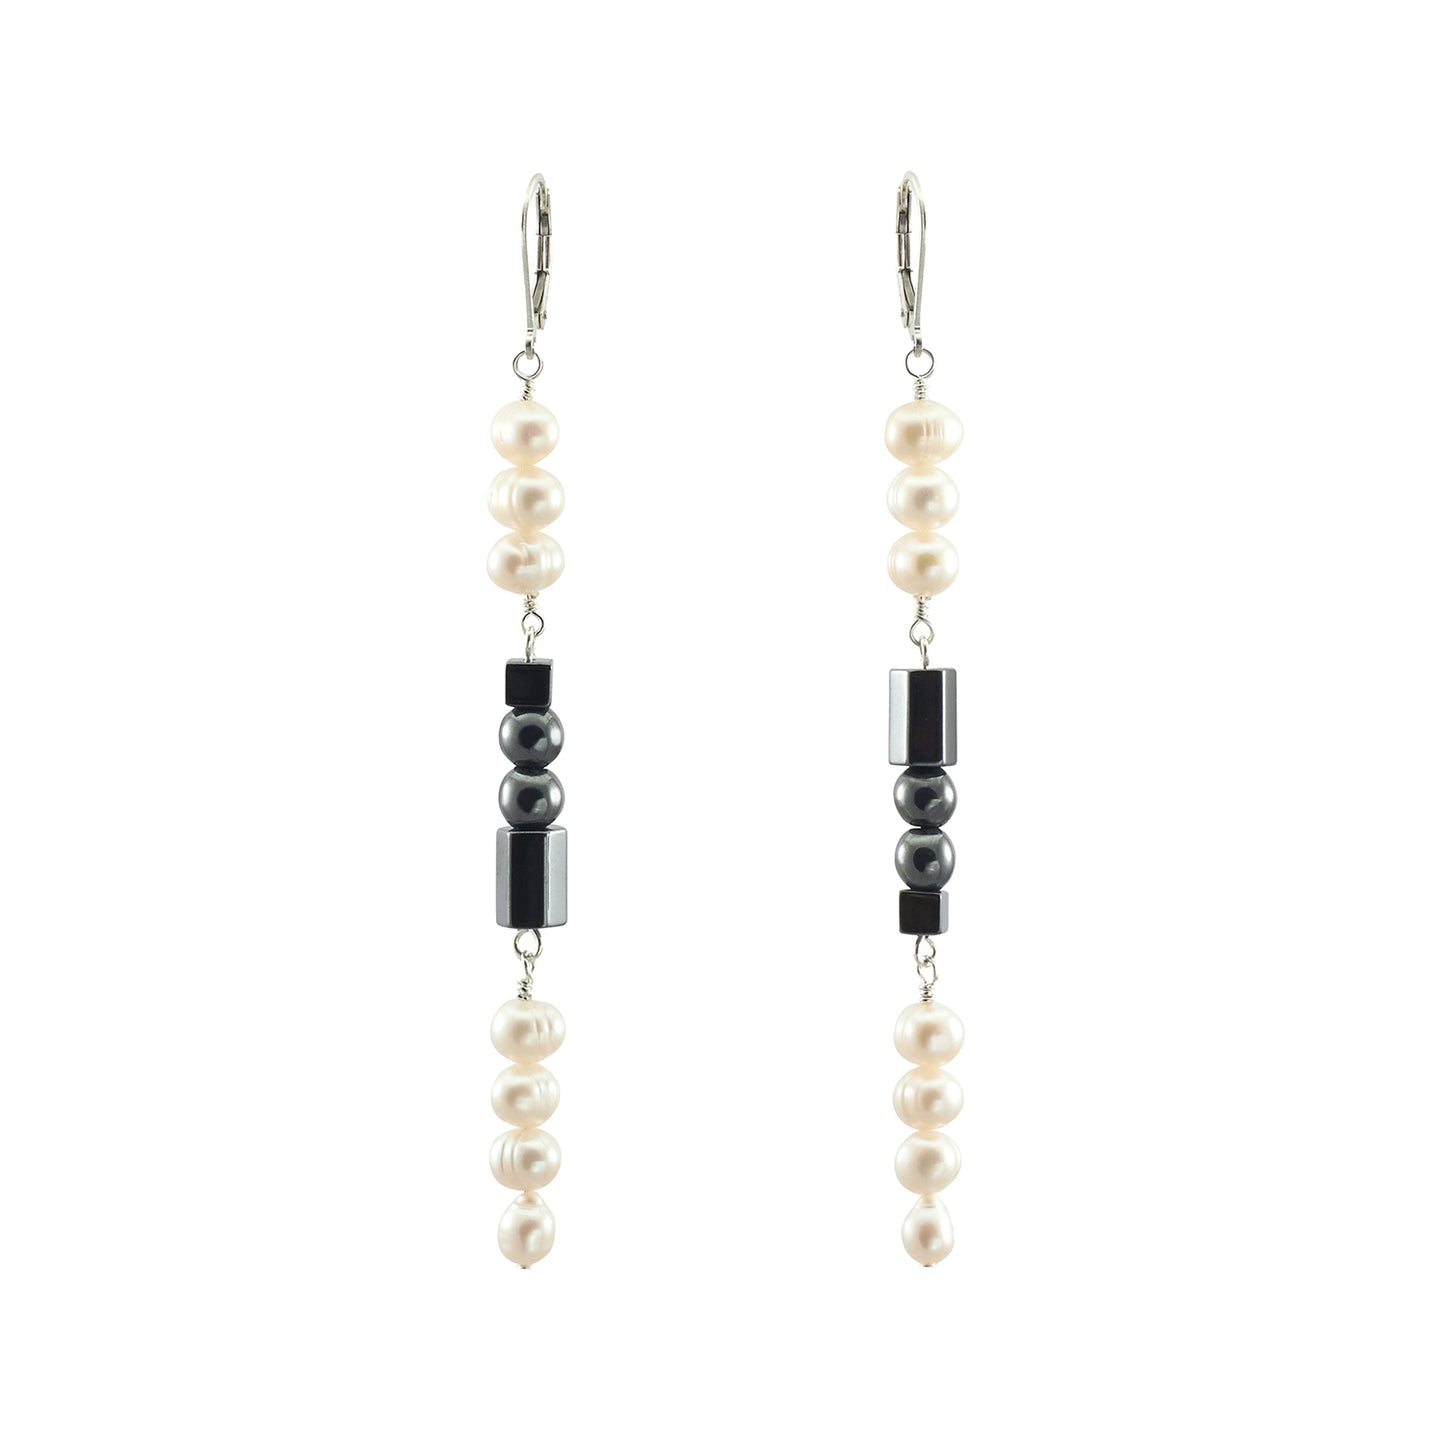 Long Droplet Earrings with Freshwater Pearls and Hematine